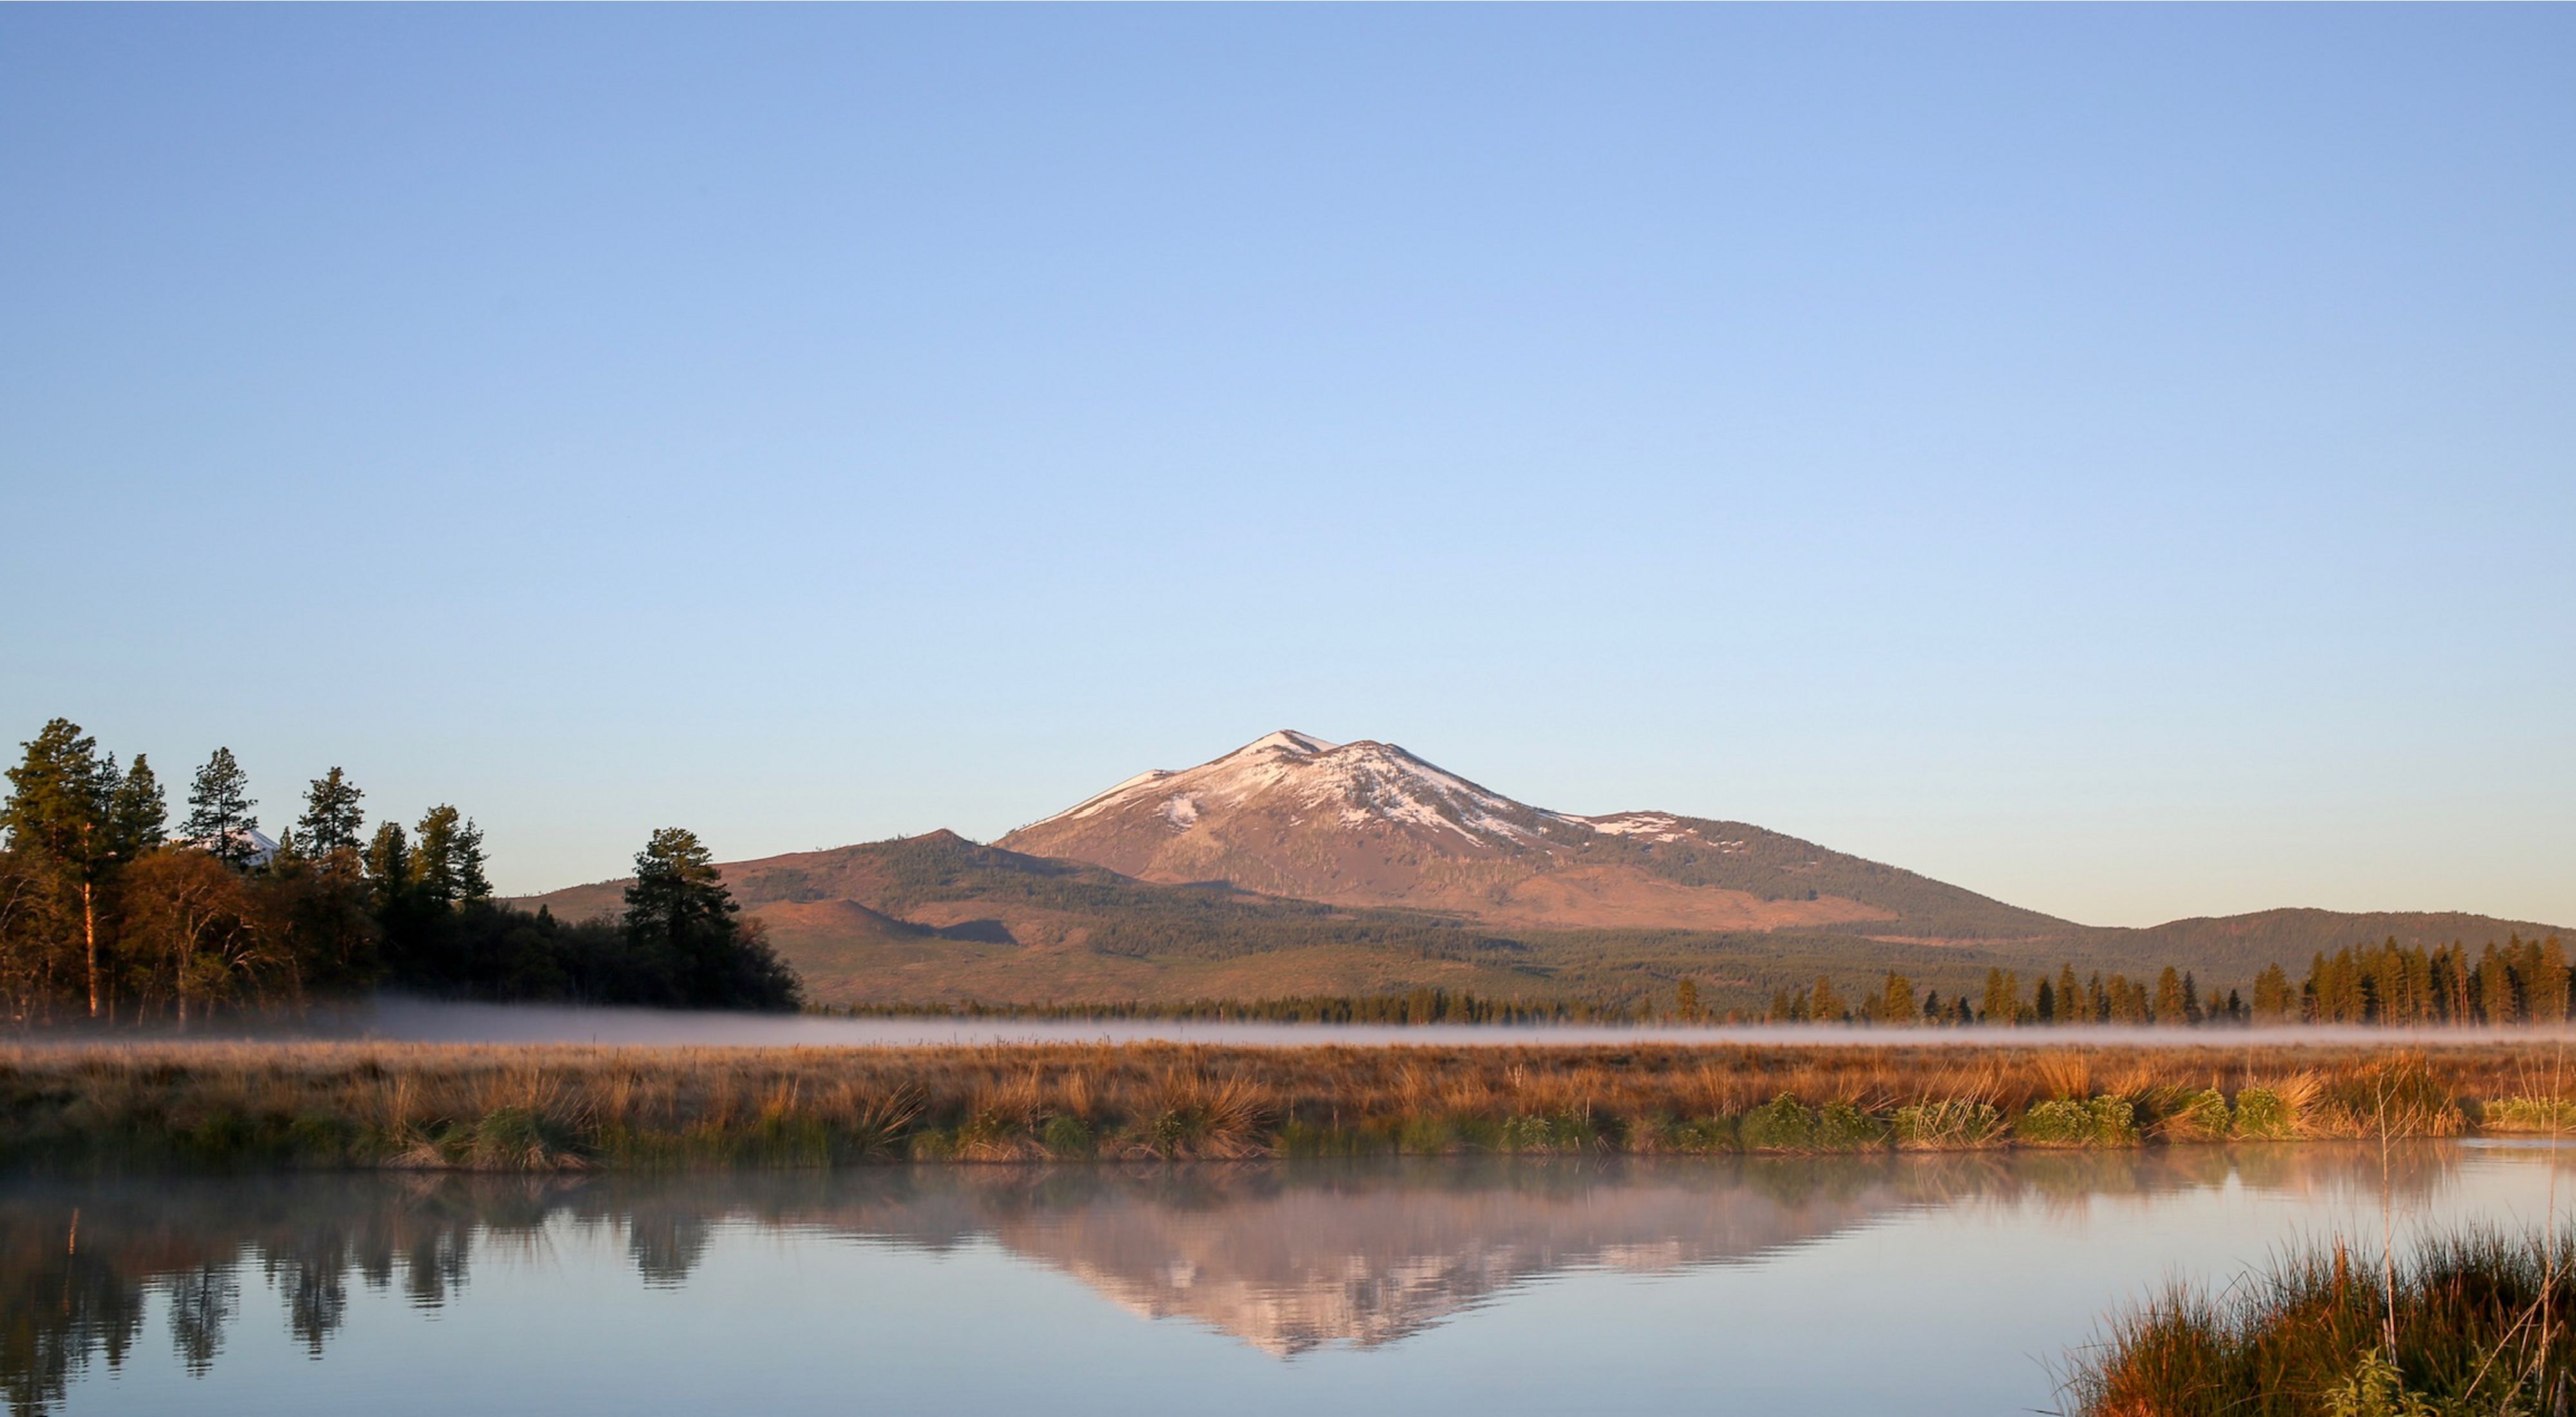 Glassy water with grasses on both sides in the foreground and a snowy mountain in the background. 